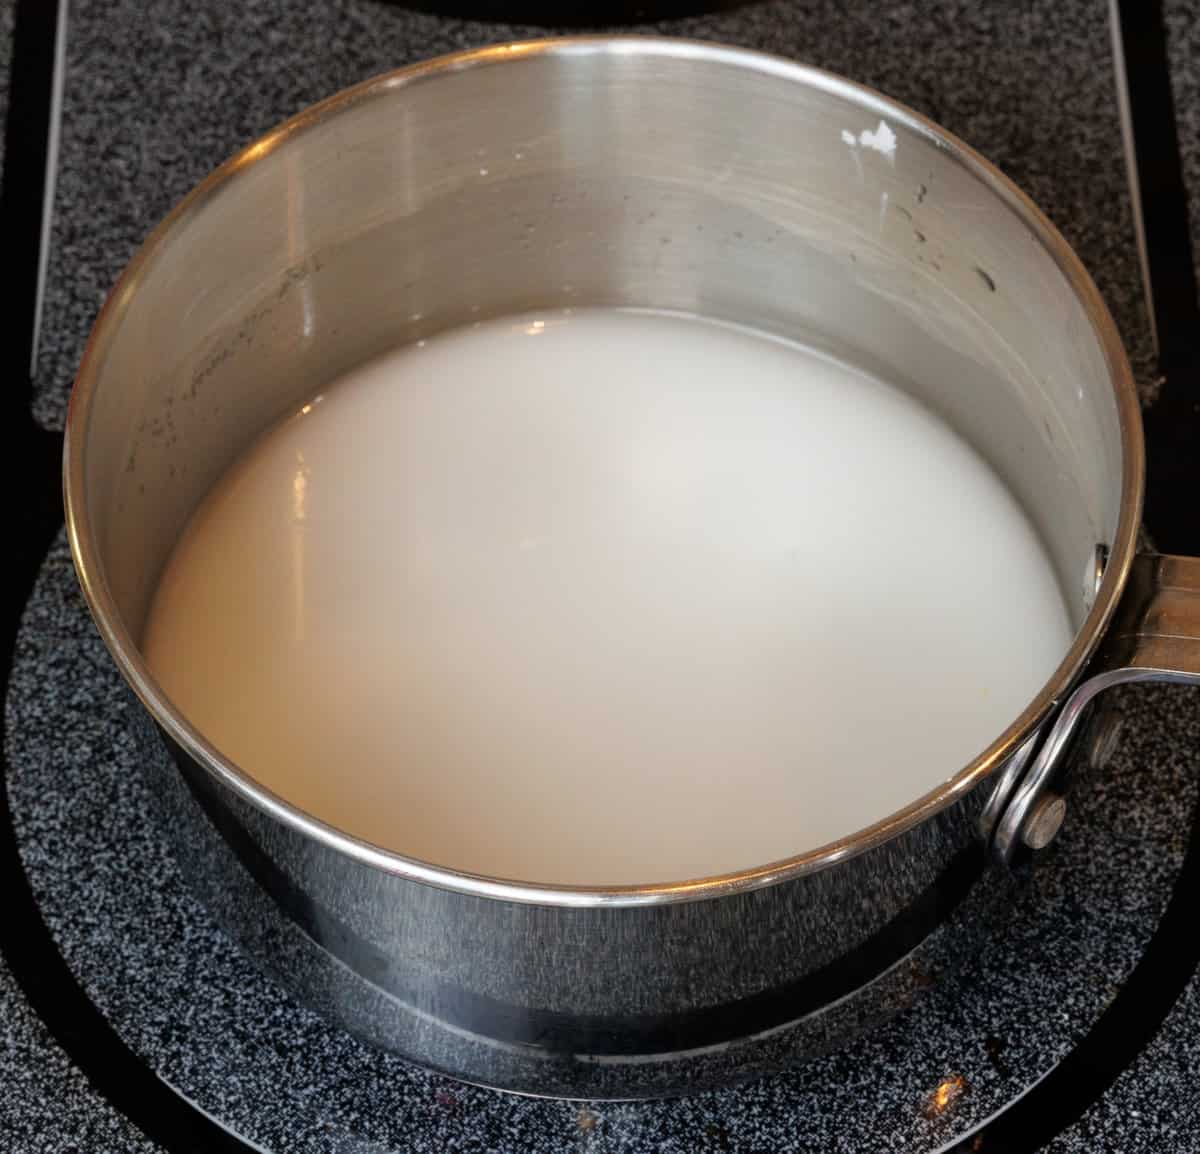 cornstarch and water simmering in a small saucepan.